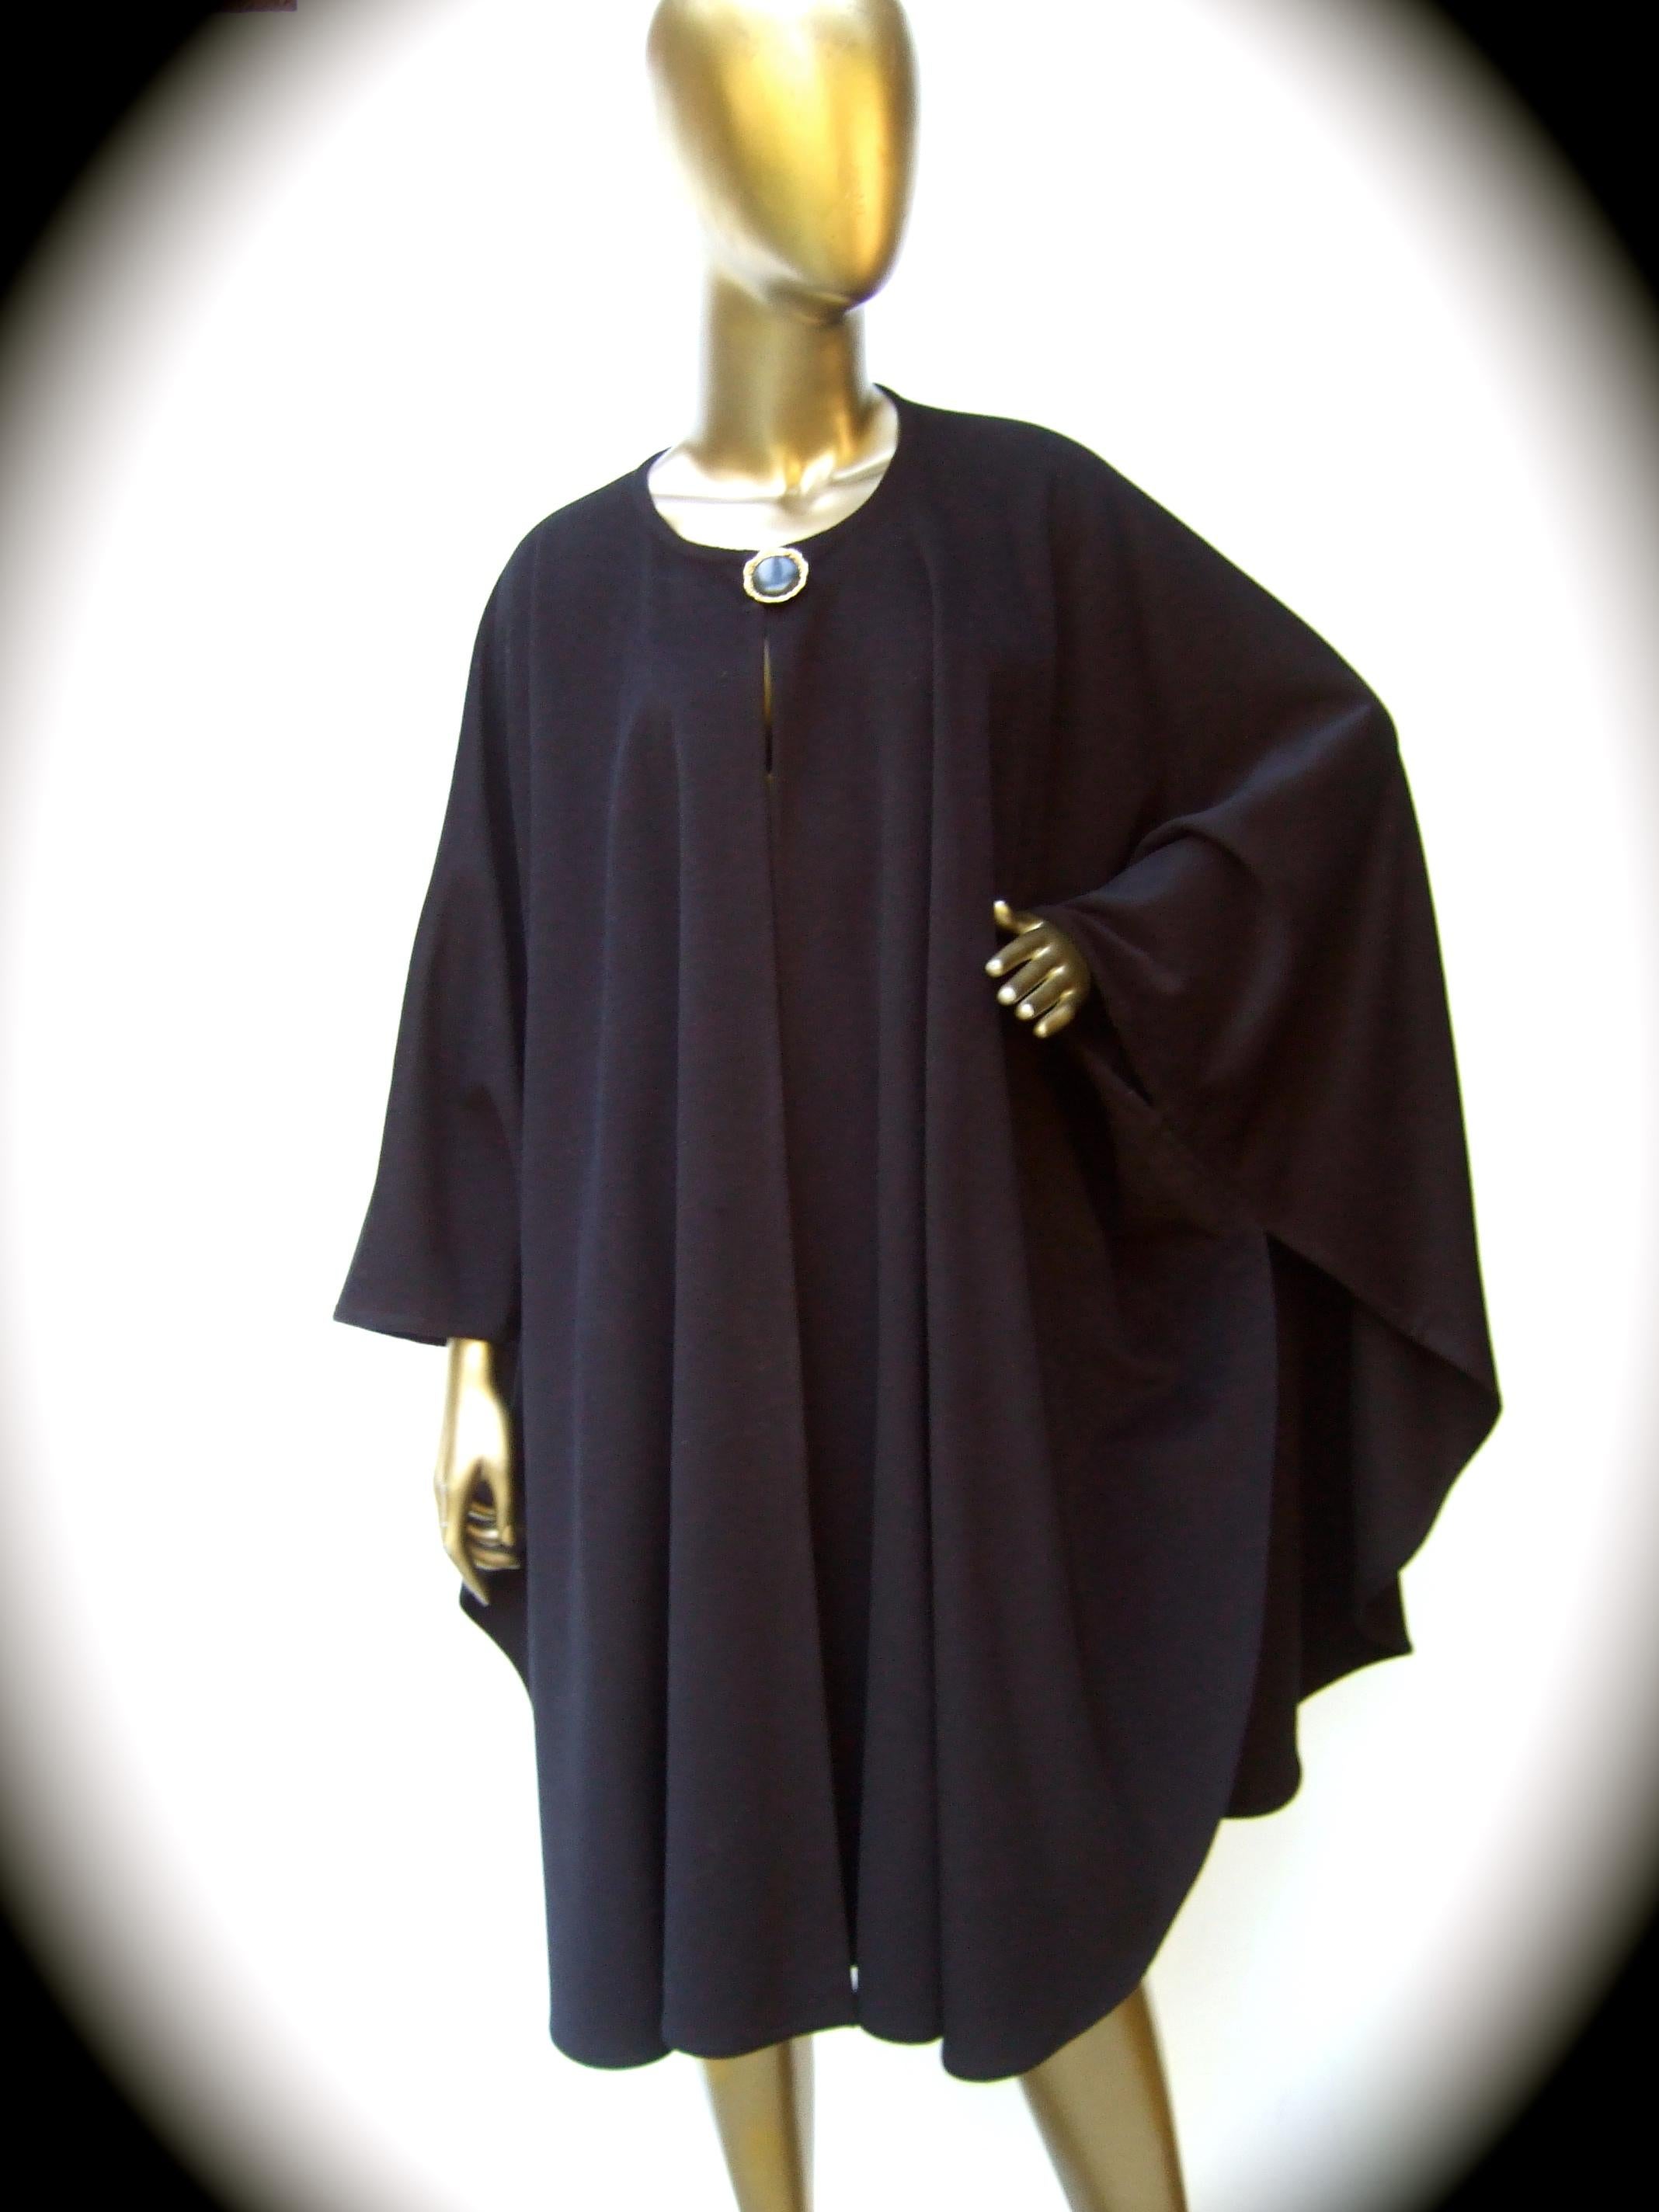 Yves Saint Laurent Fourrures Black cashmere cape c 1970s 
The stylish plush black cashmere cape secures with a single large
resin button 

The voluminous cape secures around the body with a pair of armhole slits
Makes a timeless chic garment 

The